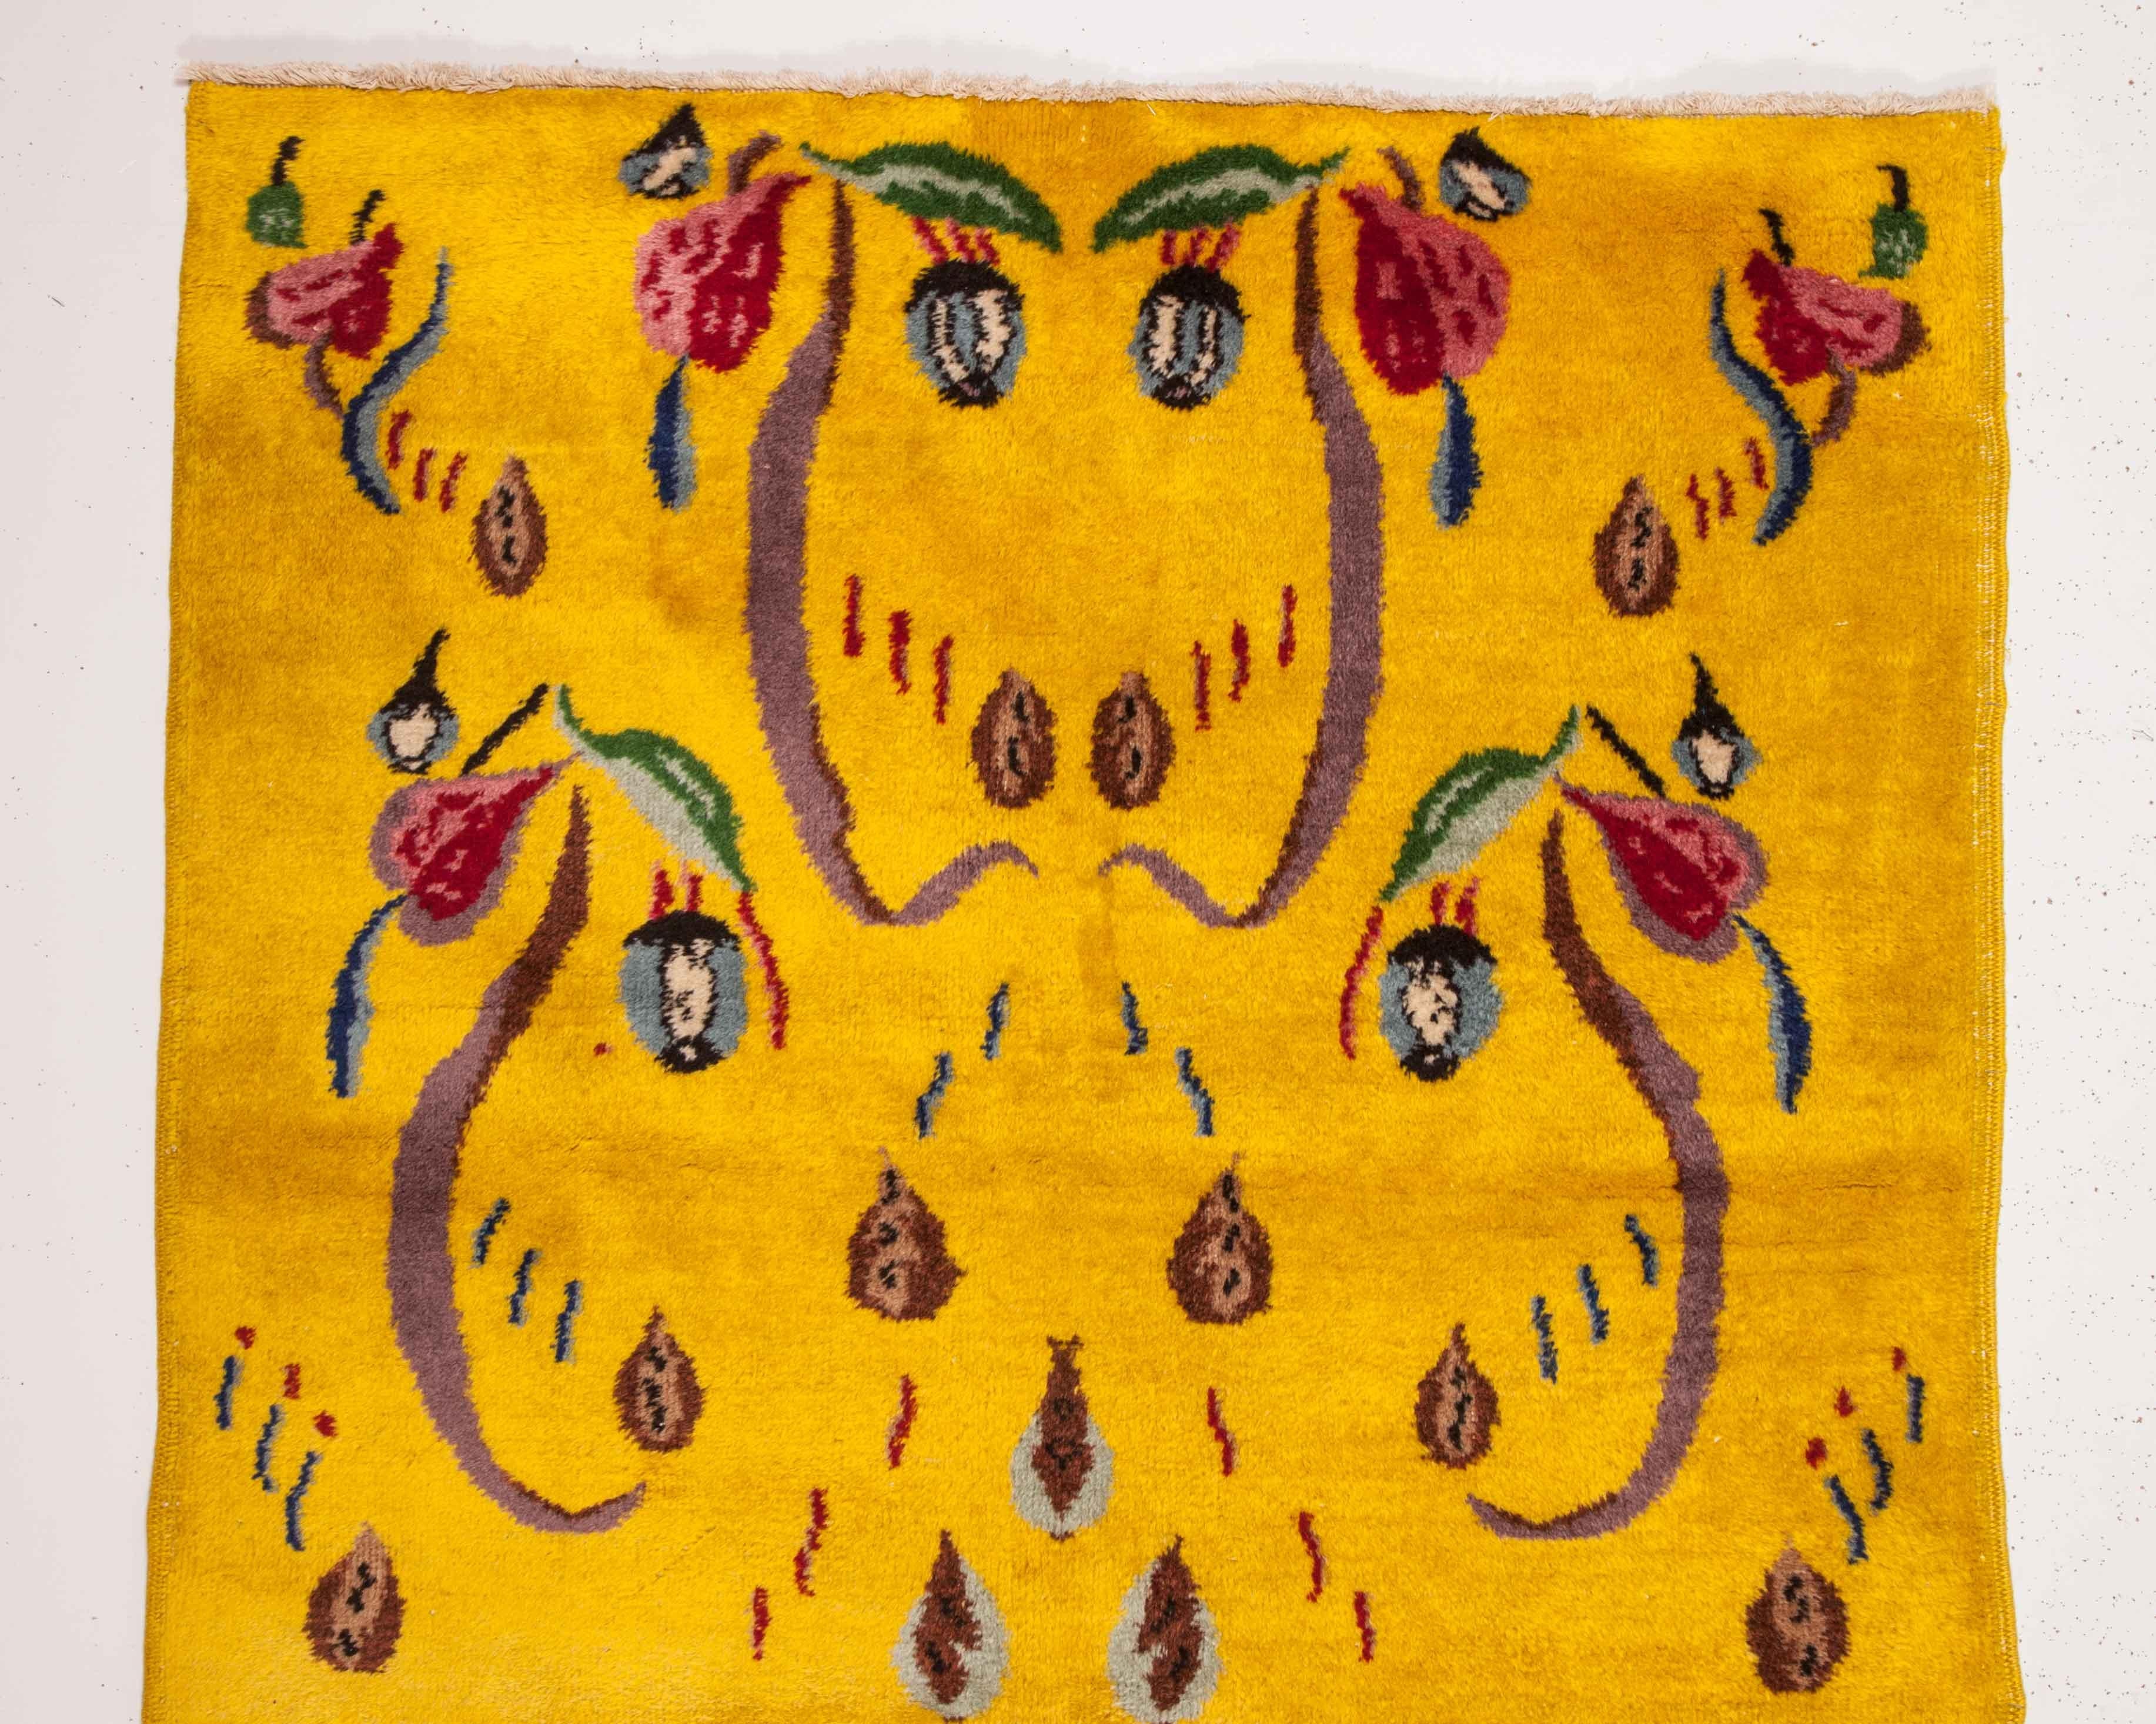 These rugs were probably woven after a group of rugs designed by famous Turkish singer Zeki Muren. Apparently Muren only had 11 or 12 designs but the design variety of these midcentury rugs seem to be endless. The rugs were woven in a Turkish city